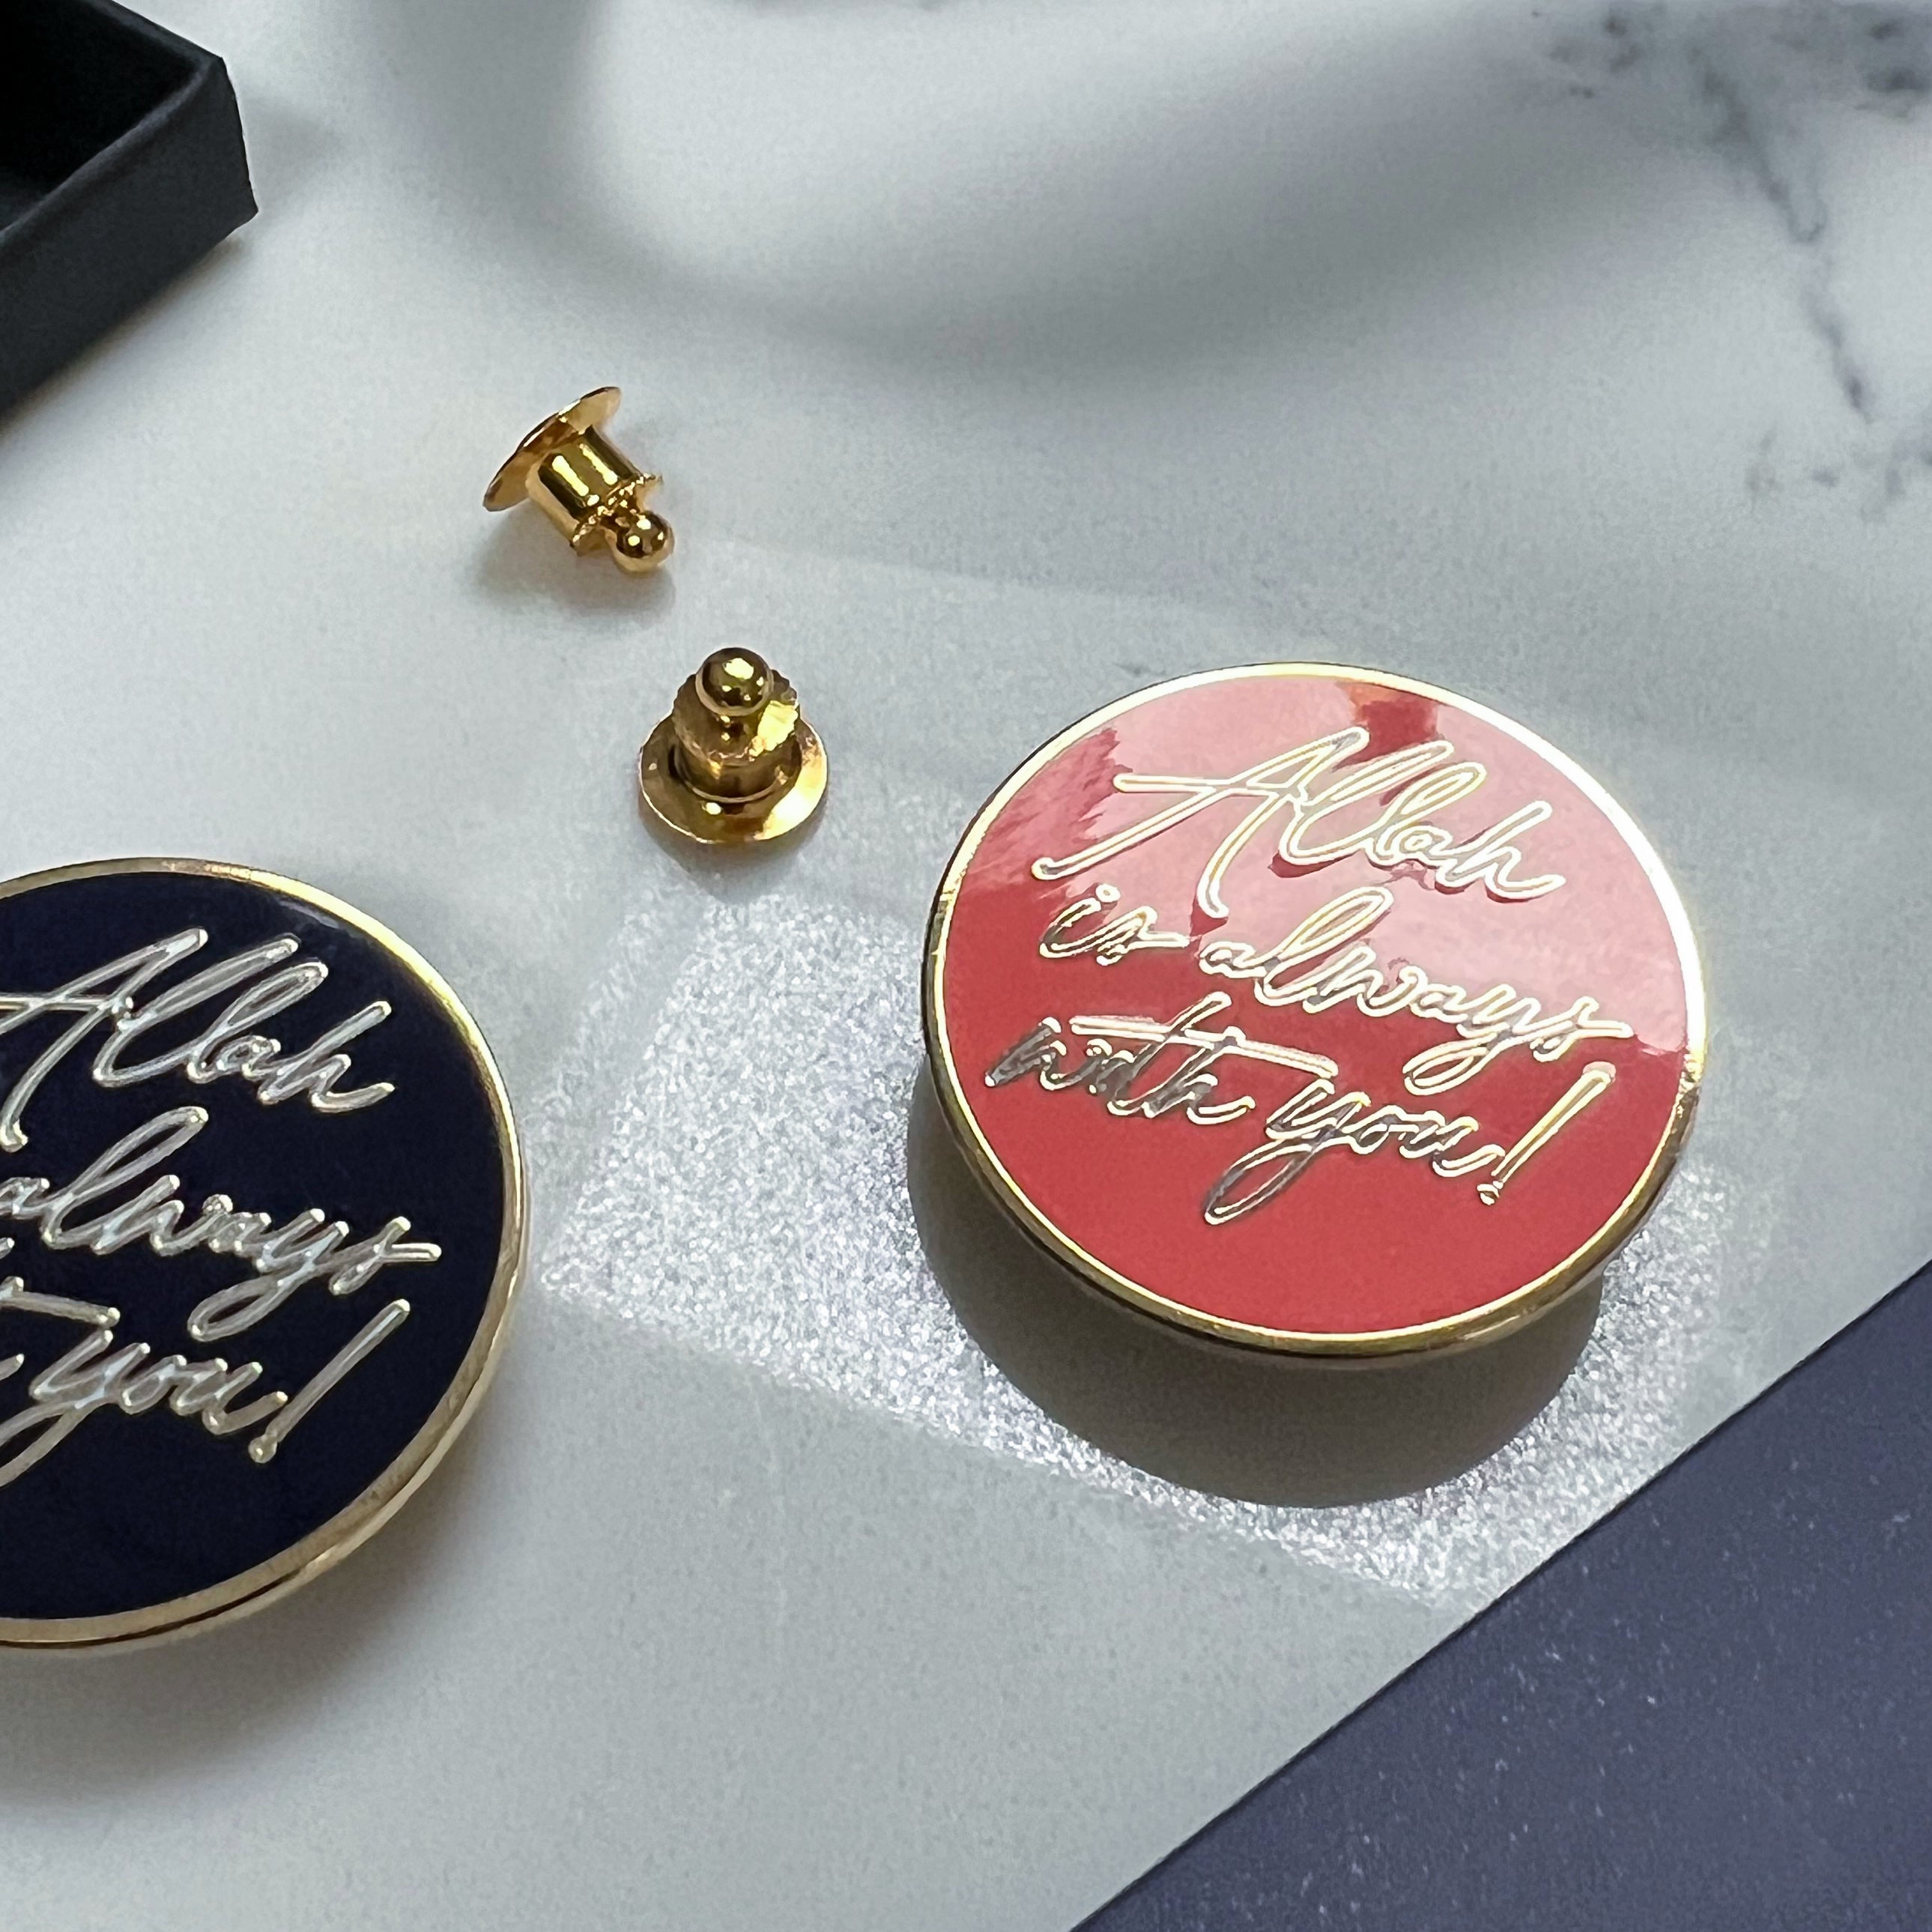 New Gold Plated Hard Enamel Pin Badge - Allah is Always With You | Available in Black, Navy, and Coral by Safar London